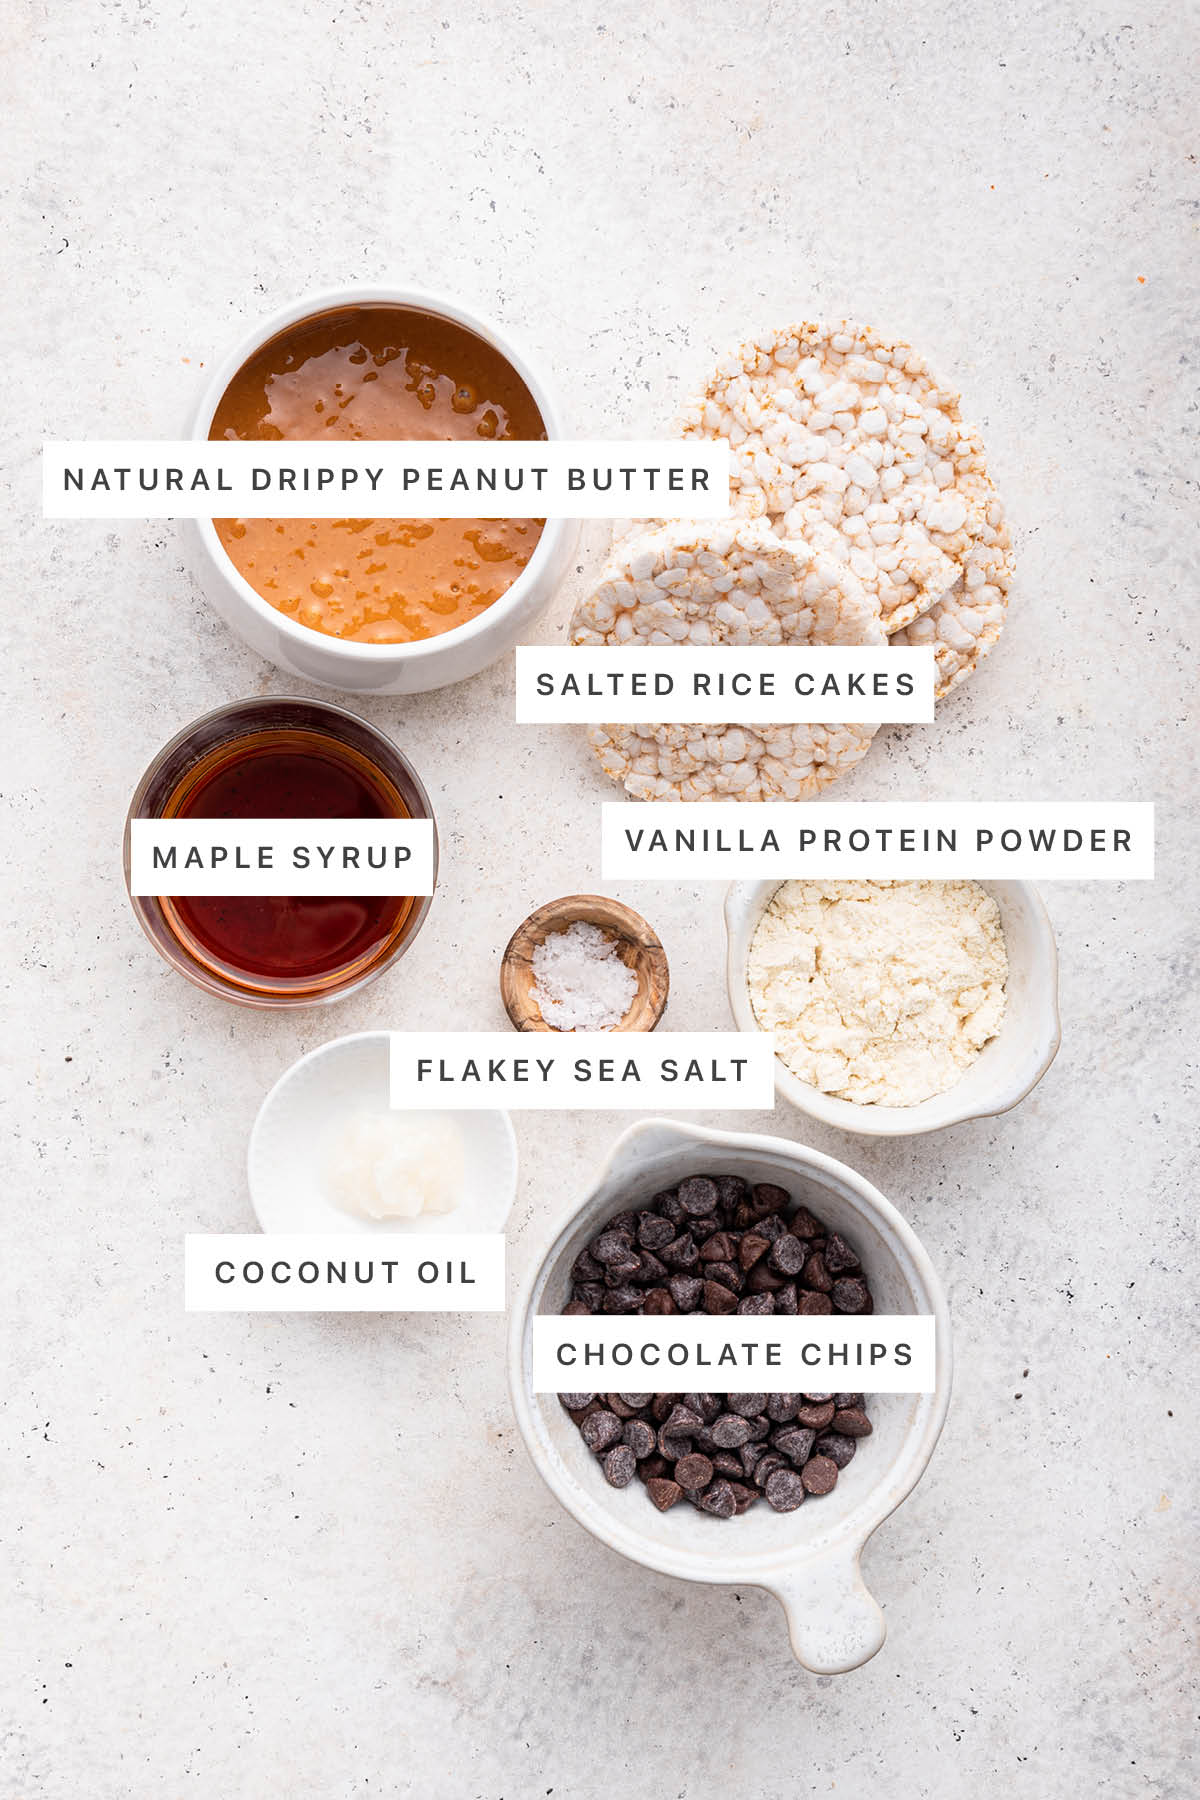 Ingredients measured out to make No Bake Peanut Butter Crunch Bars: natural drippy peanut butter, salted rice cakes, maple syrup, flakey sea salt, vanilla protein powder, coconut oil and chocolate chips.